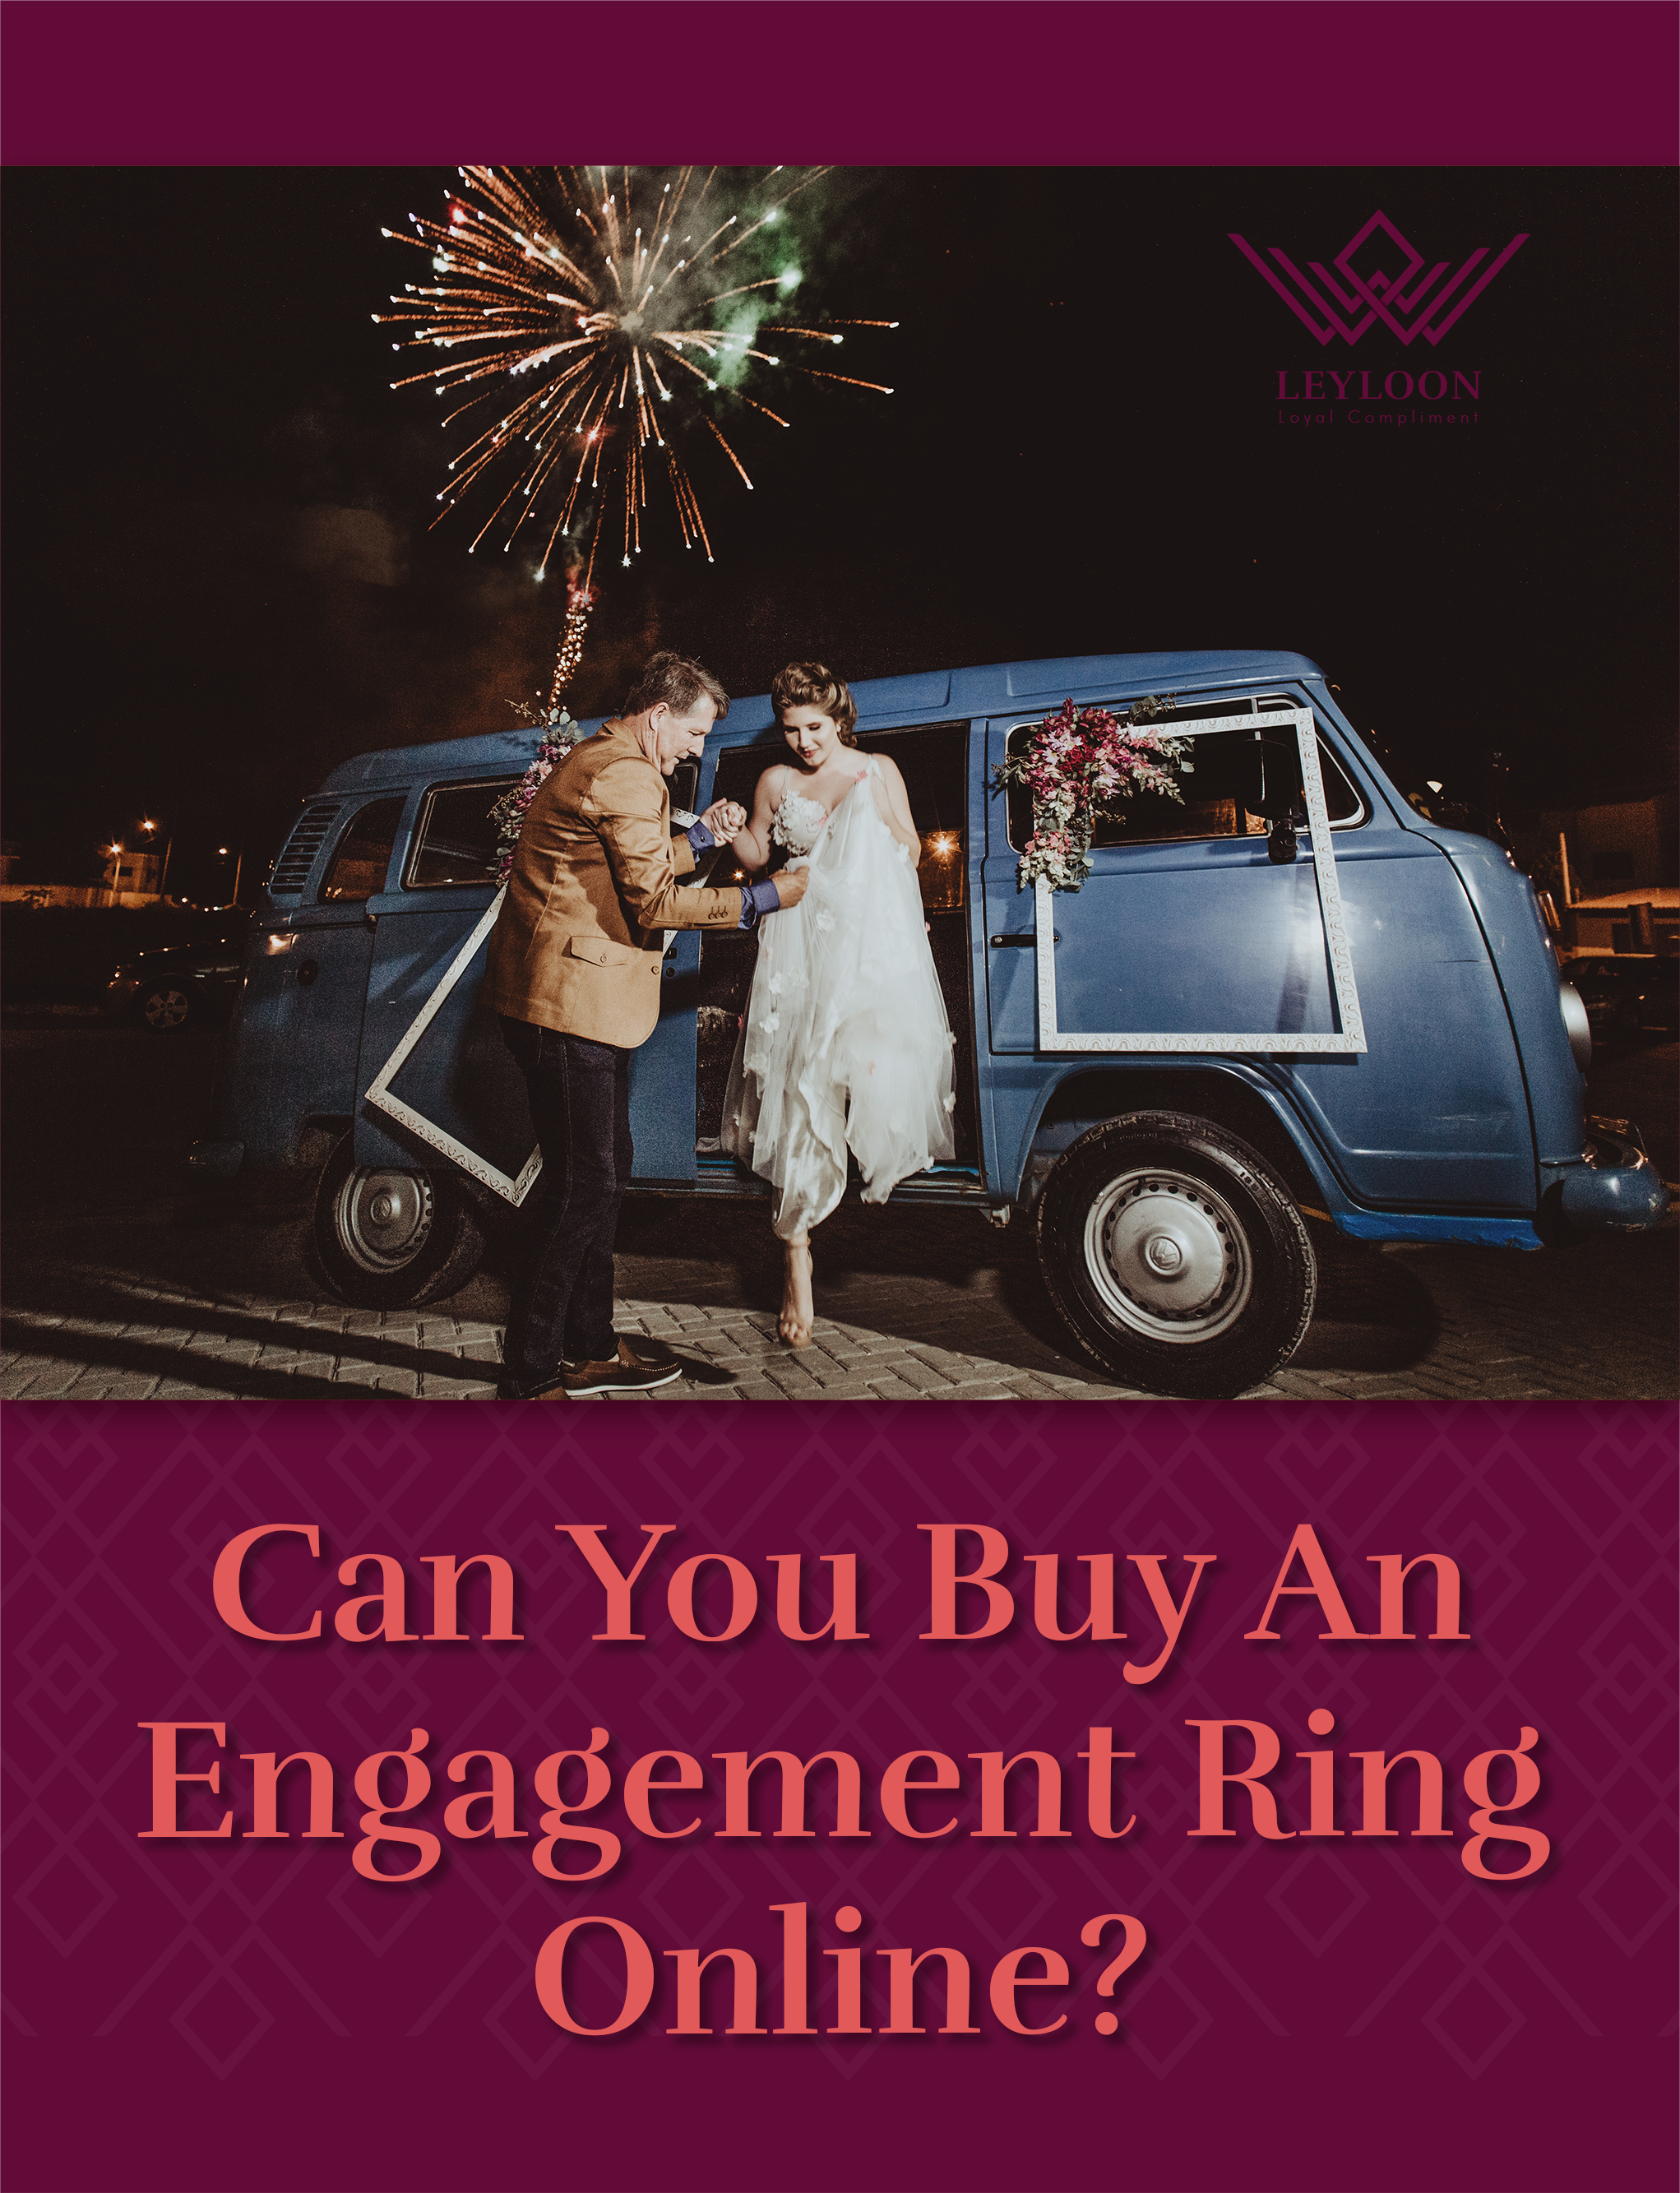 Can you buy an engagement ring online